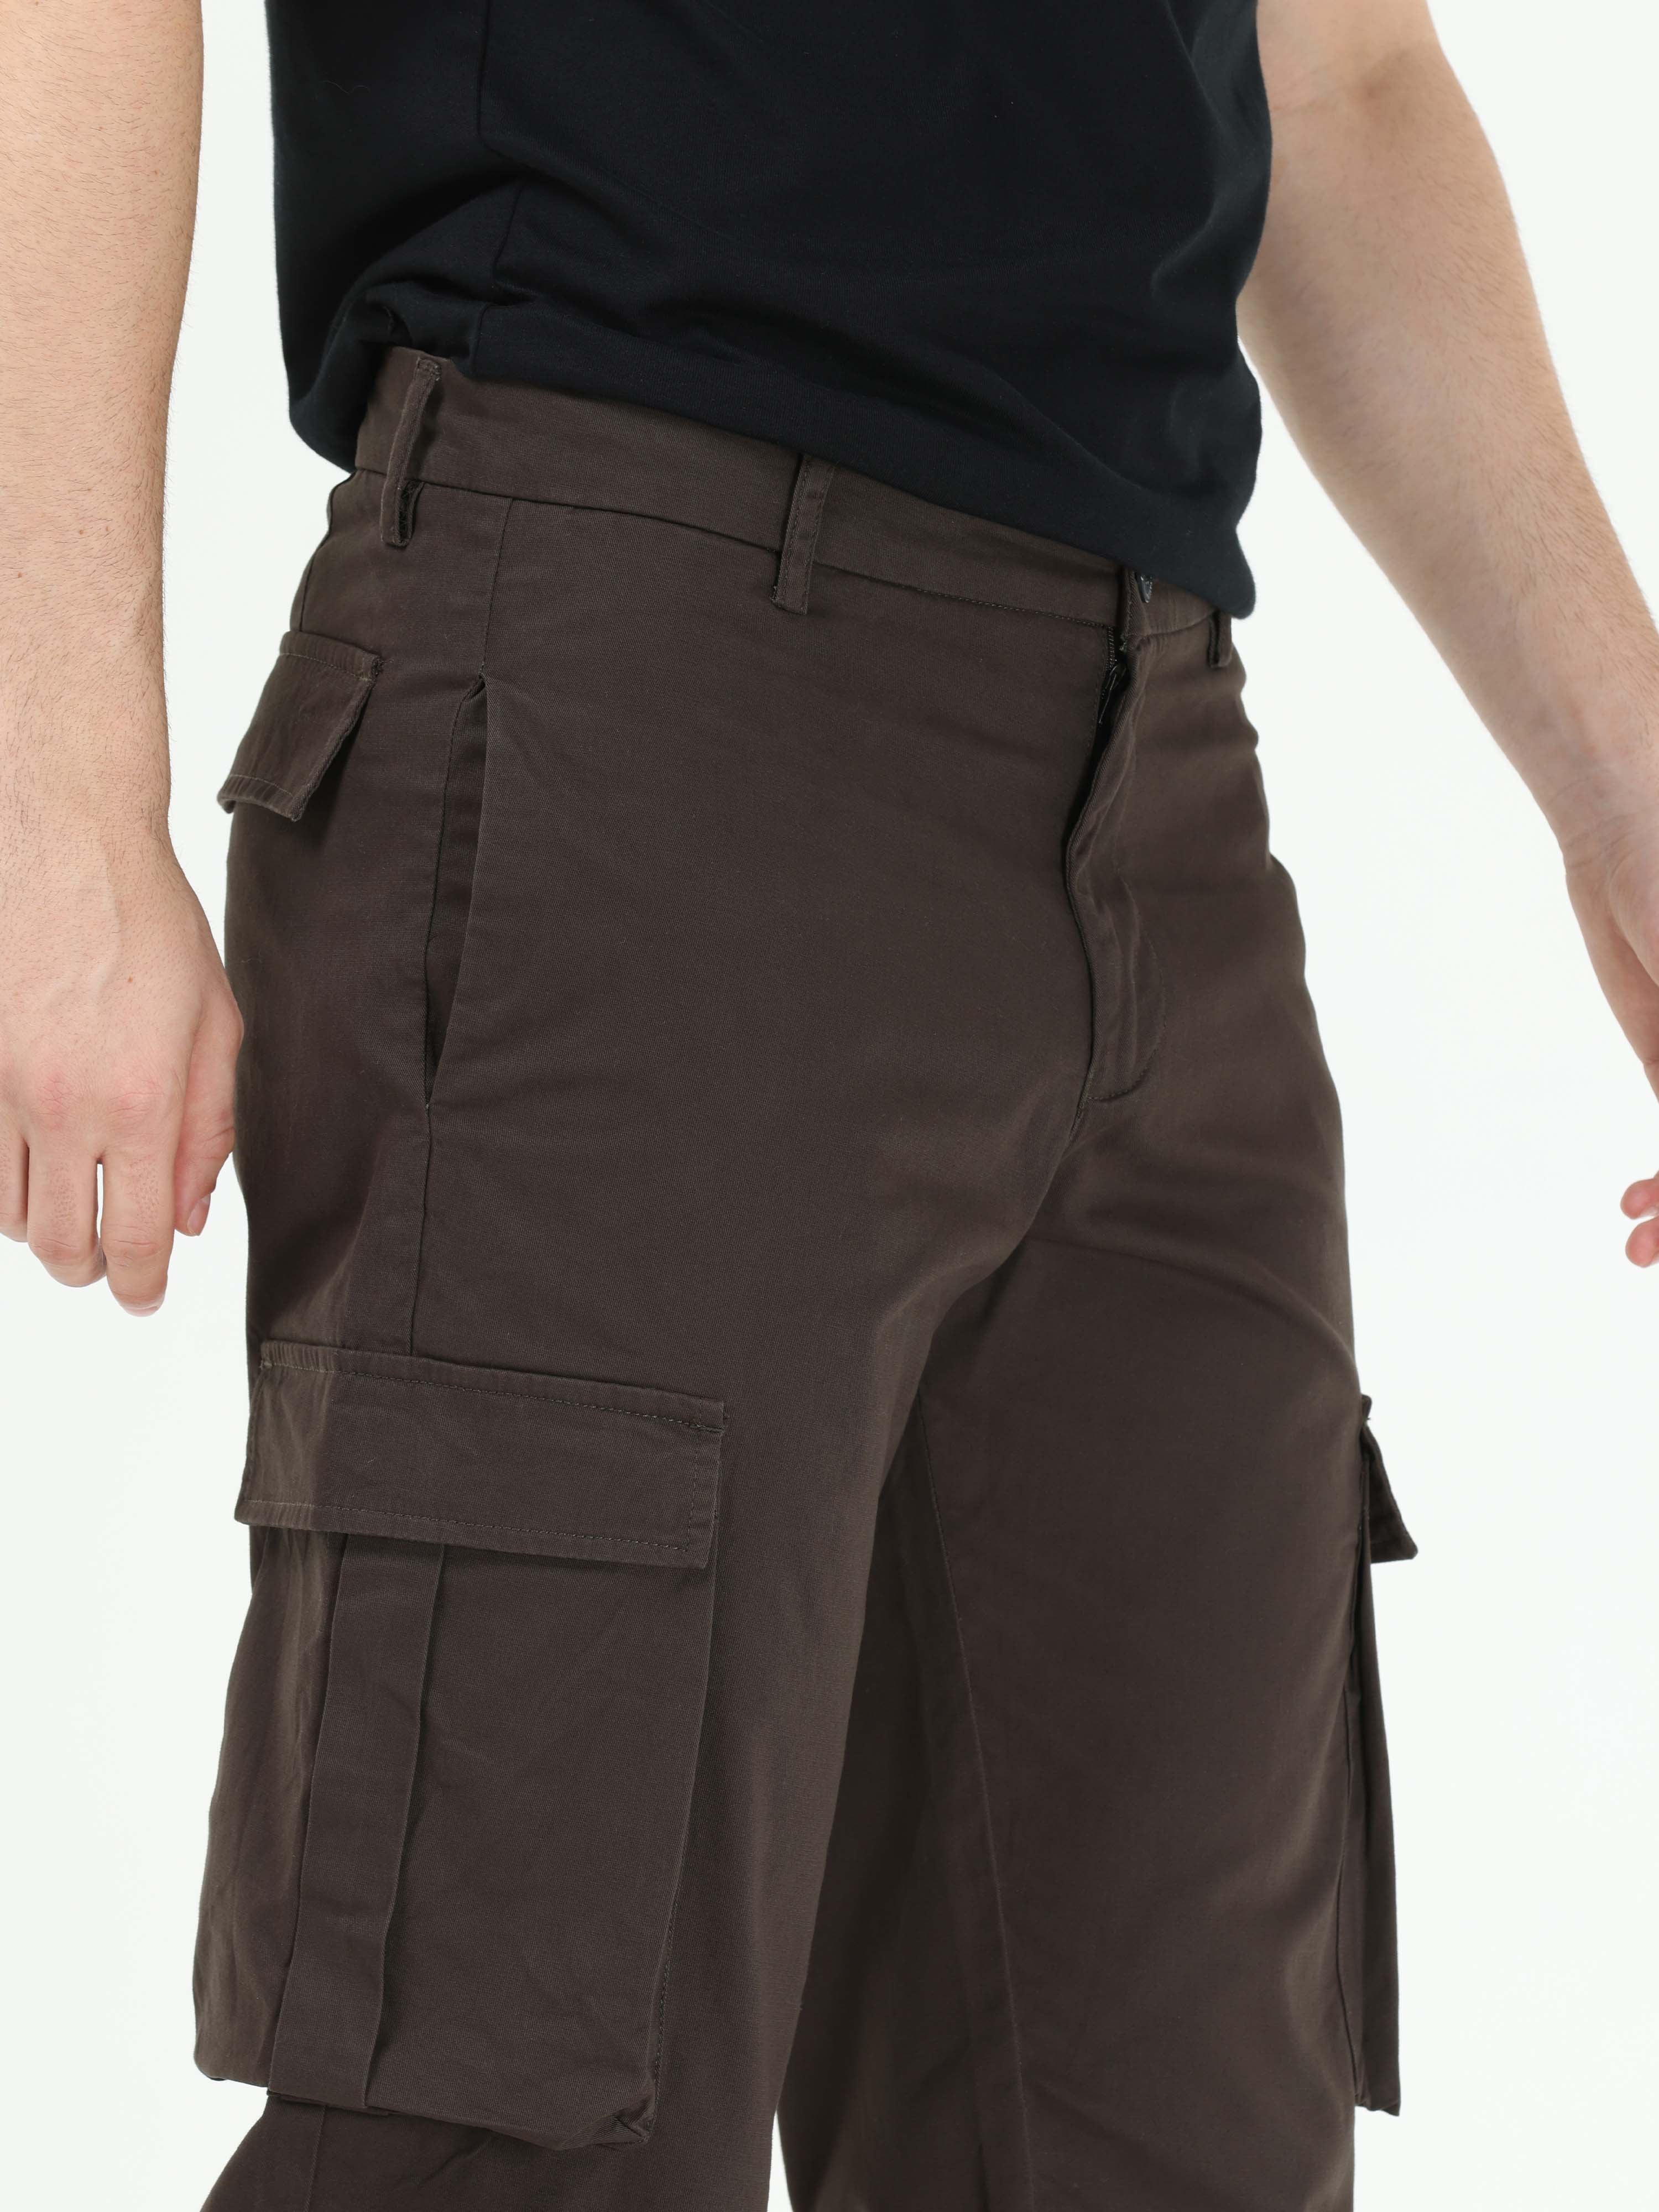 Finest Twill Dark Olive Baggy Fit Cargo